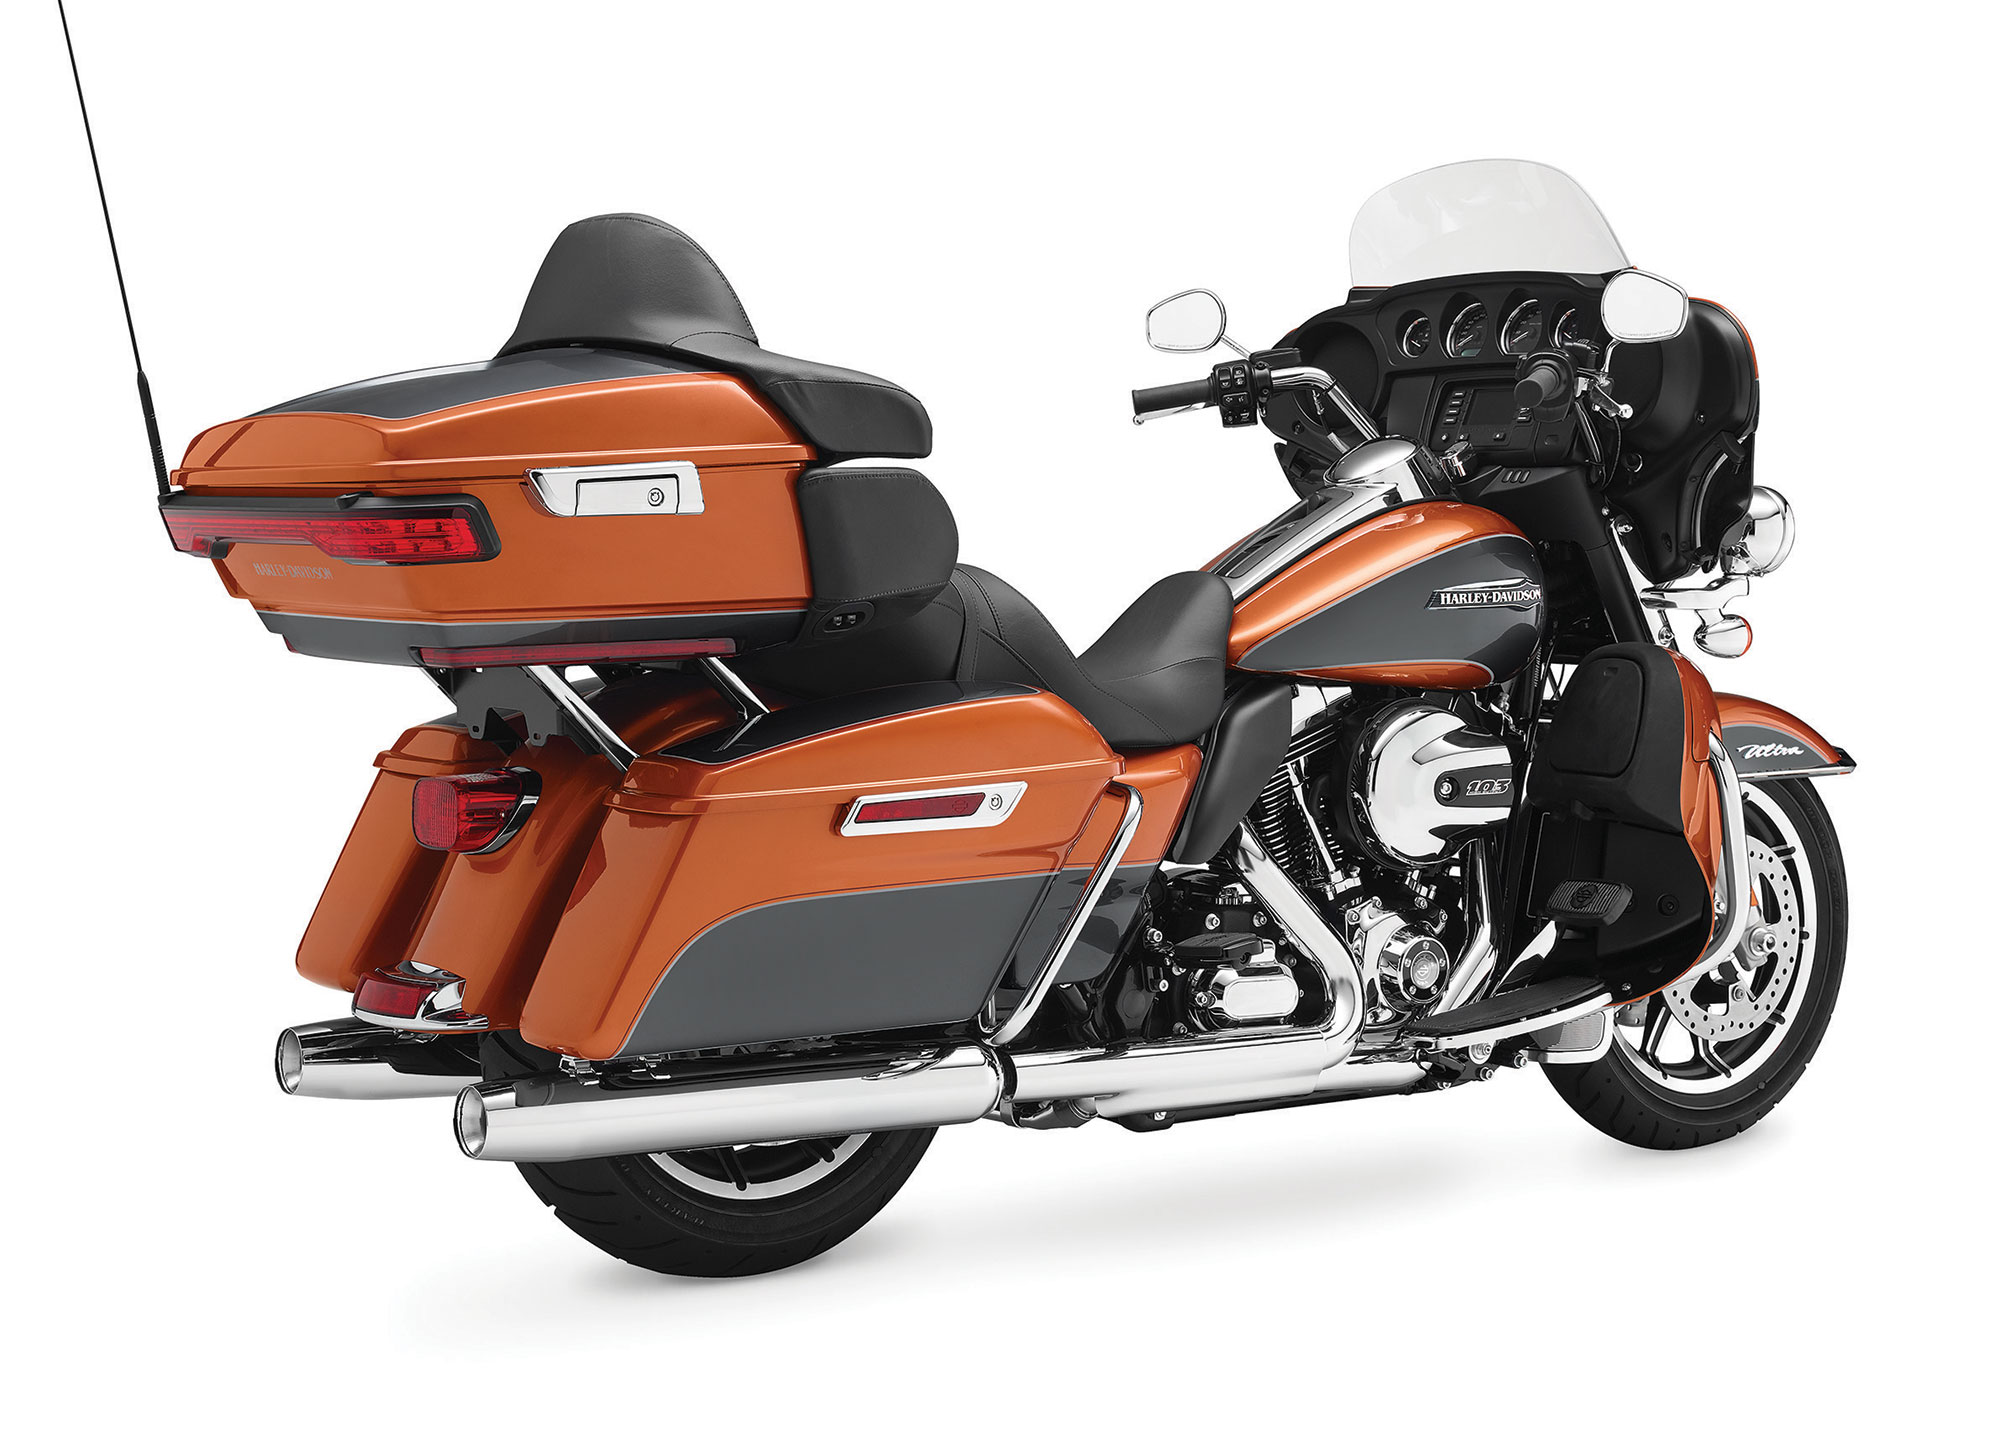 Harley-Davidson Electra Glide Ultra Classic Wallpapers